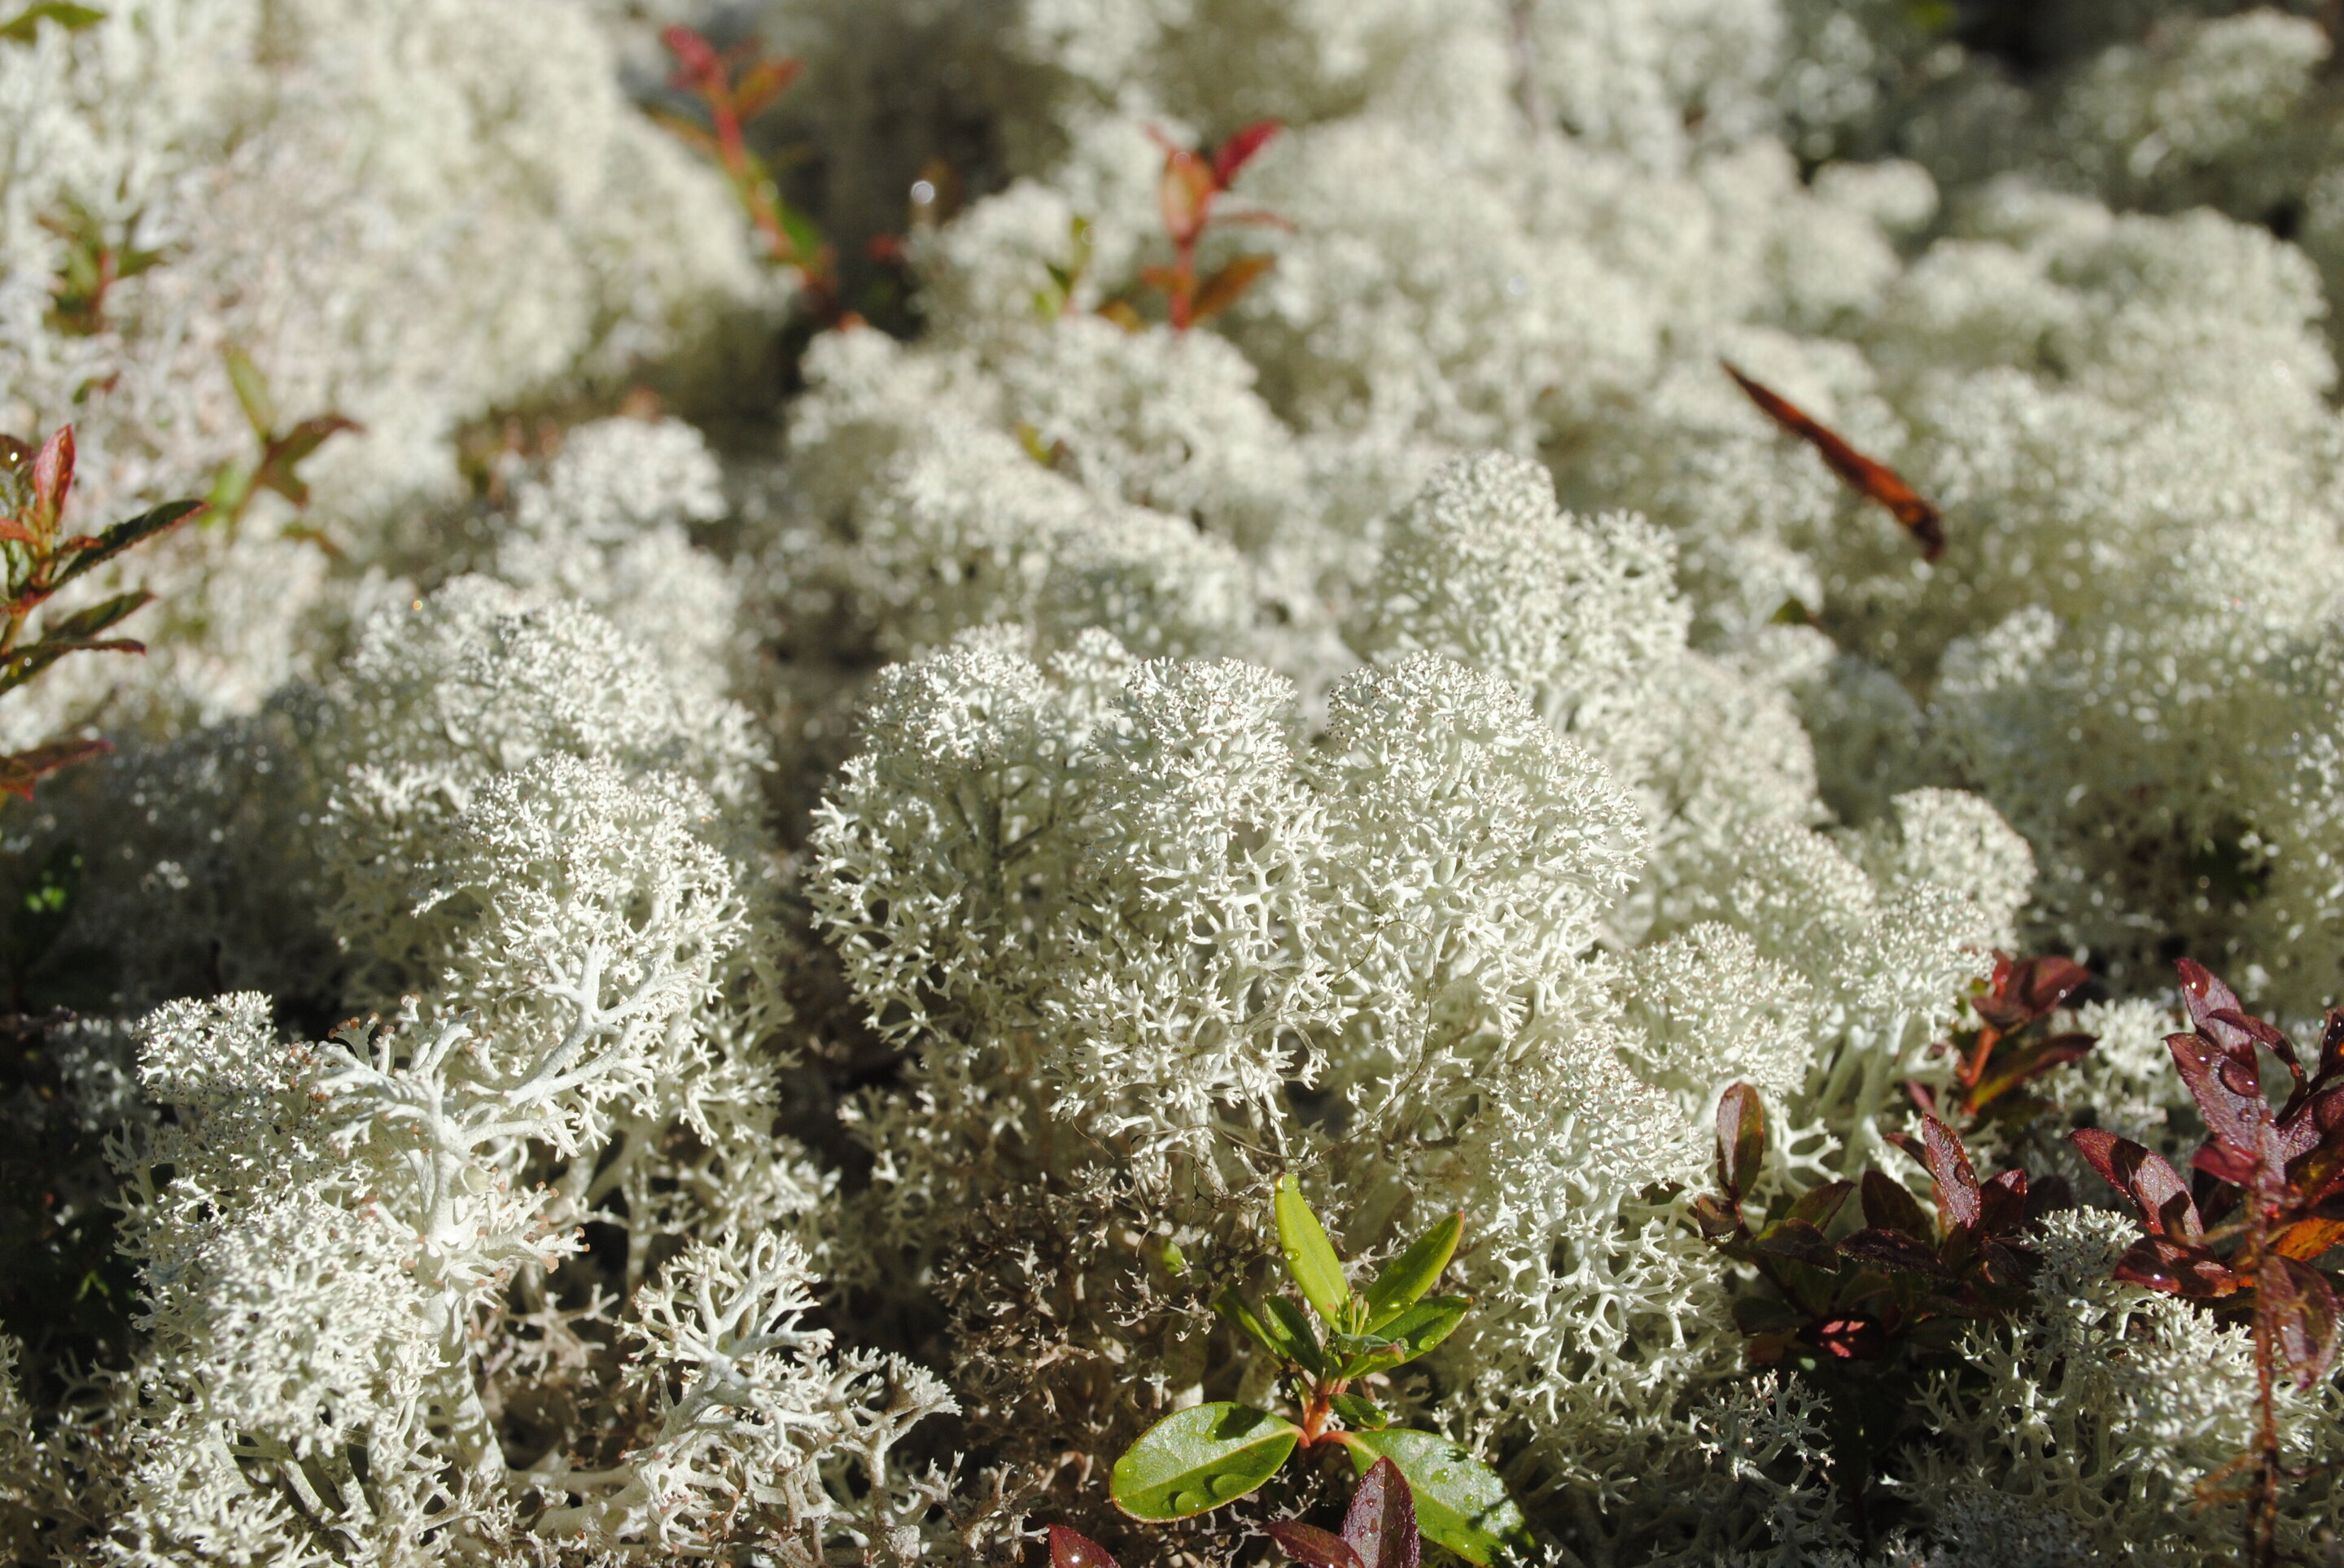 Reindeer moss has more sex than expected